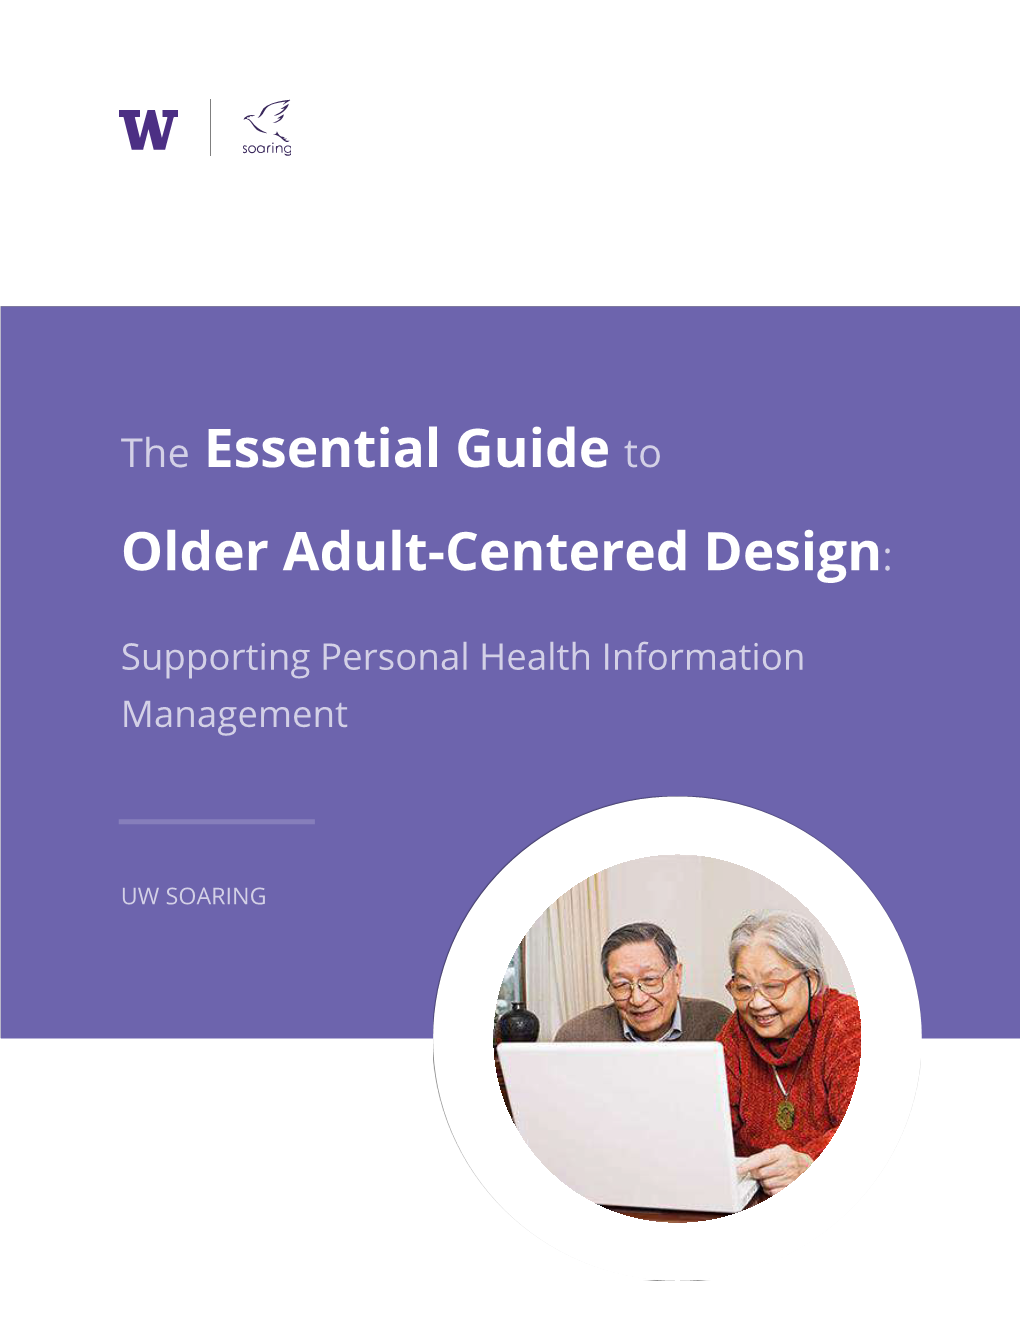 The Essential Guide to Older Adult-Centered Design: Supporting